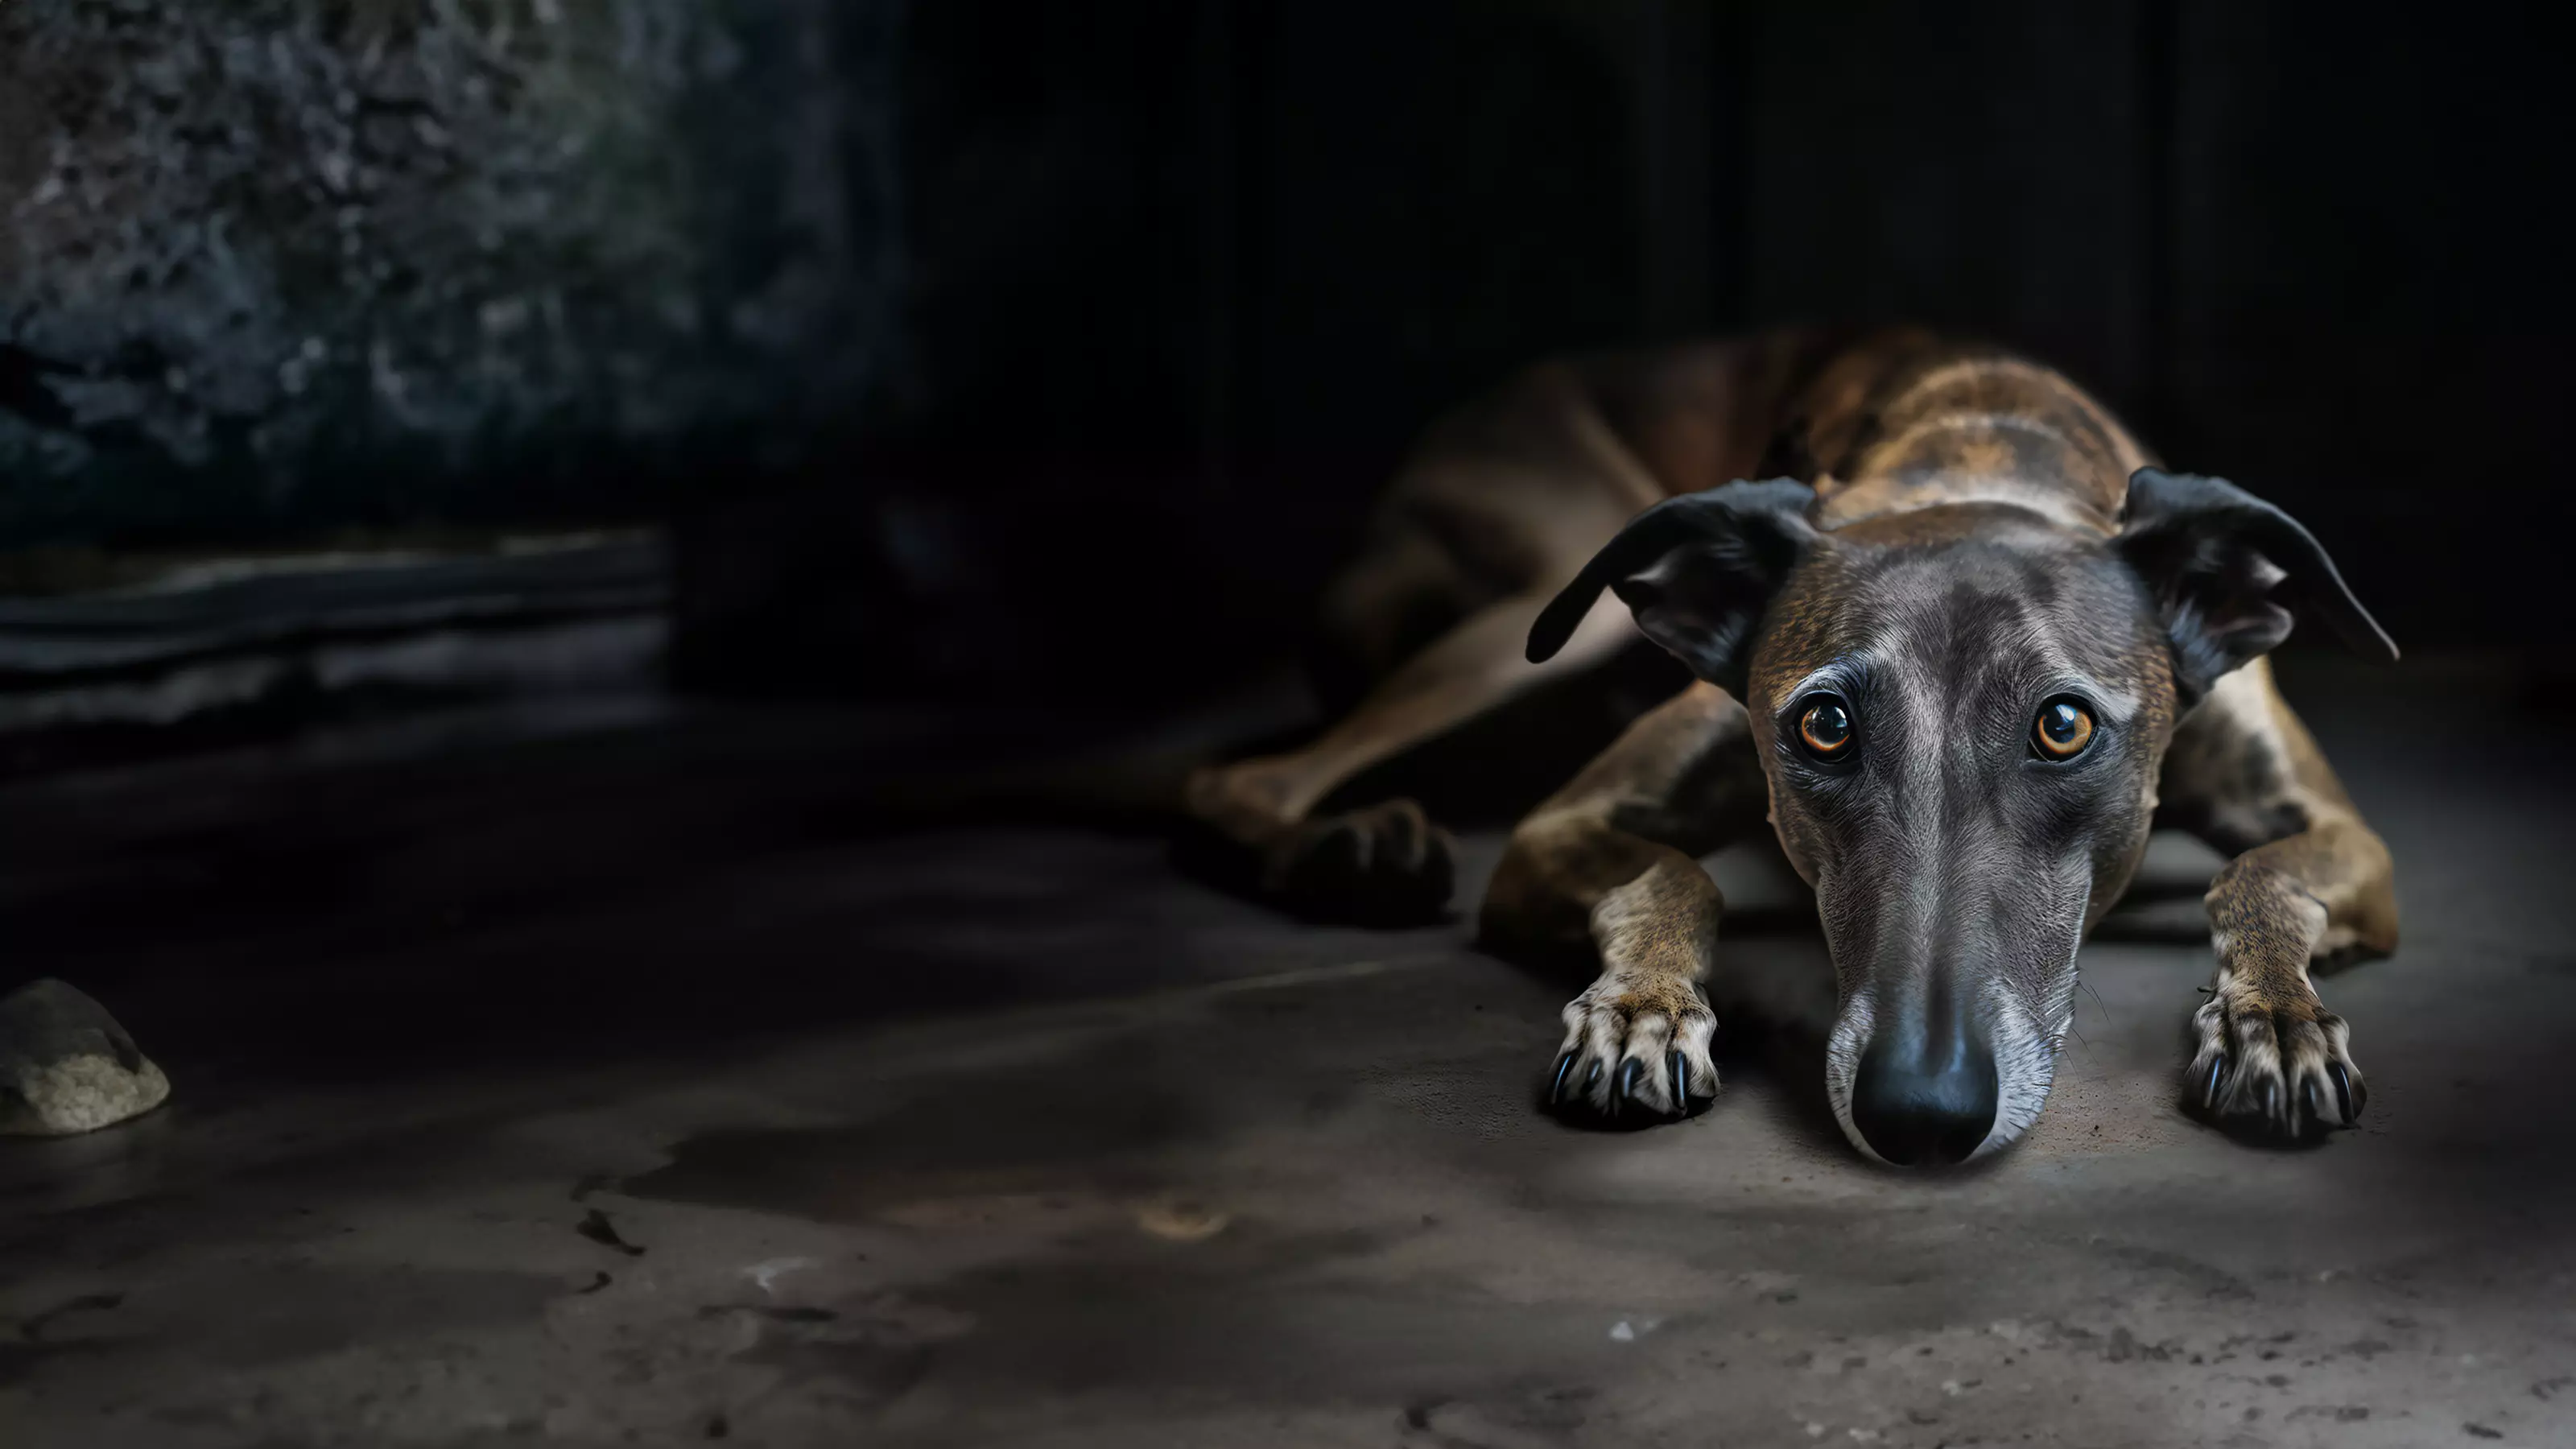 A brindle greyhound lies on a cold, barren kennel floor without comfort